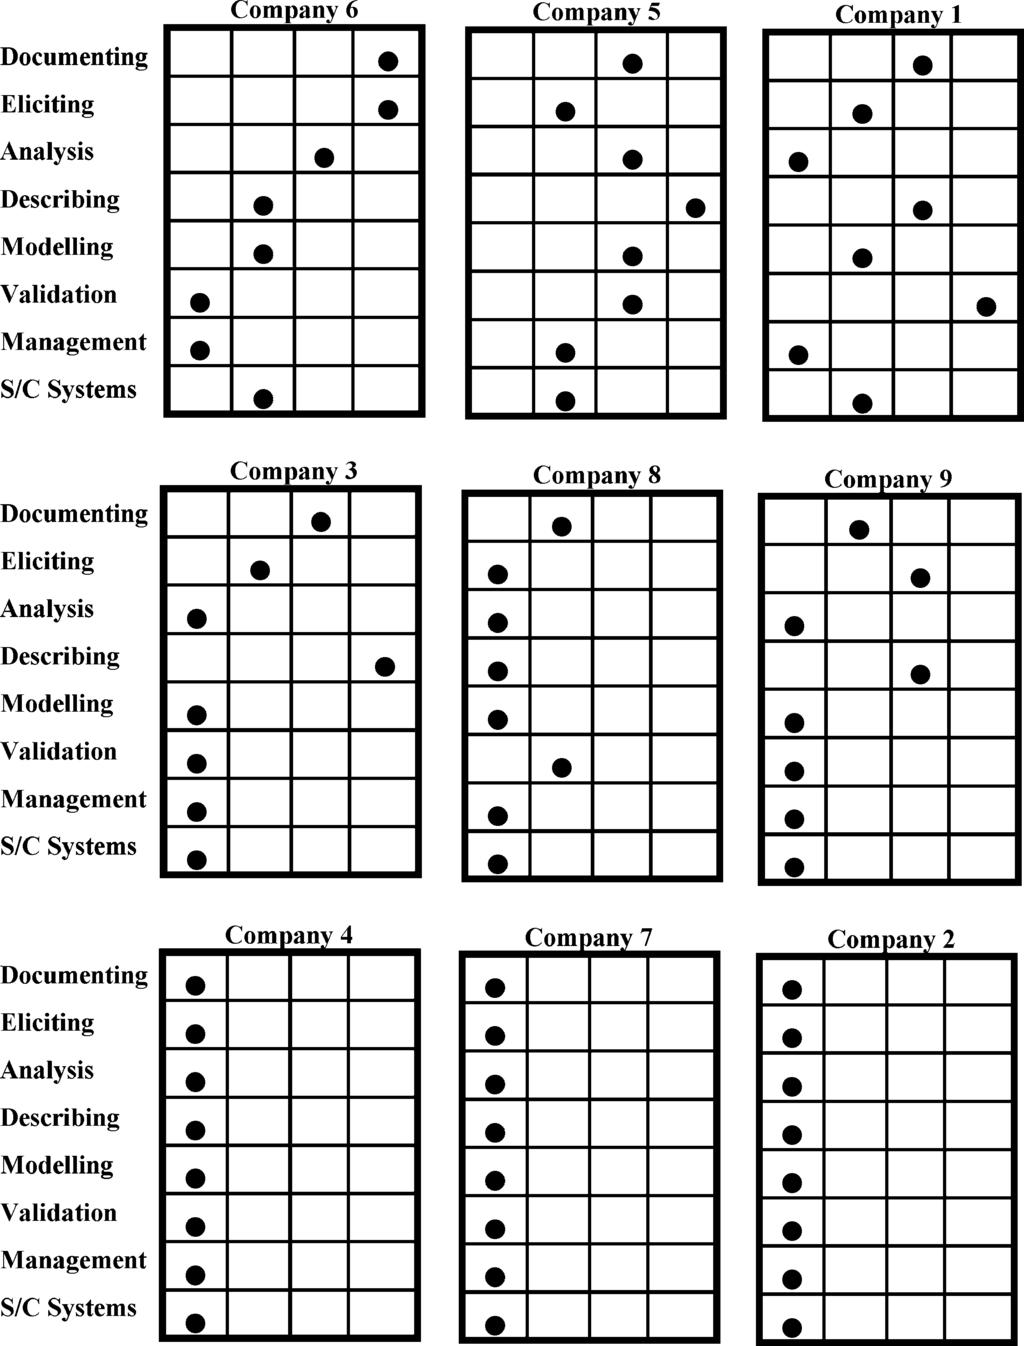 98 I. Sommerville and J. Ransom Fig. 7. Area/strength matrices after the initial maturity assessment. practices, including the use of formal specification in one company, without difficulty.